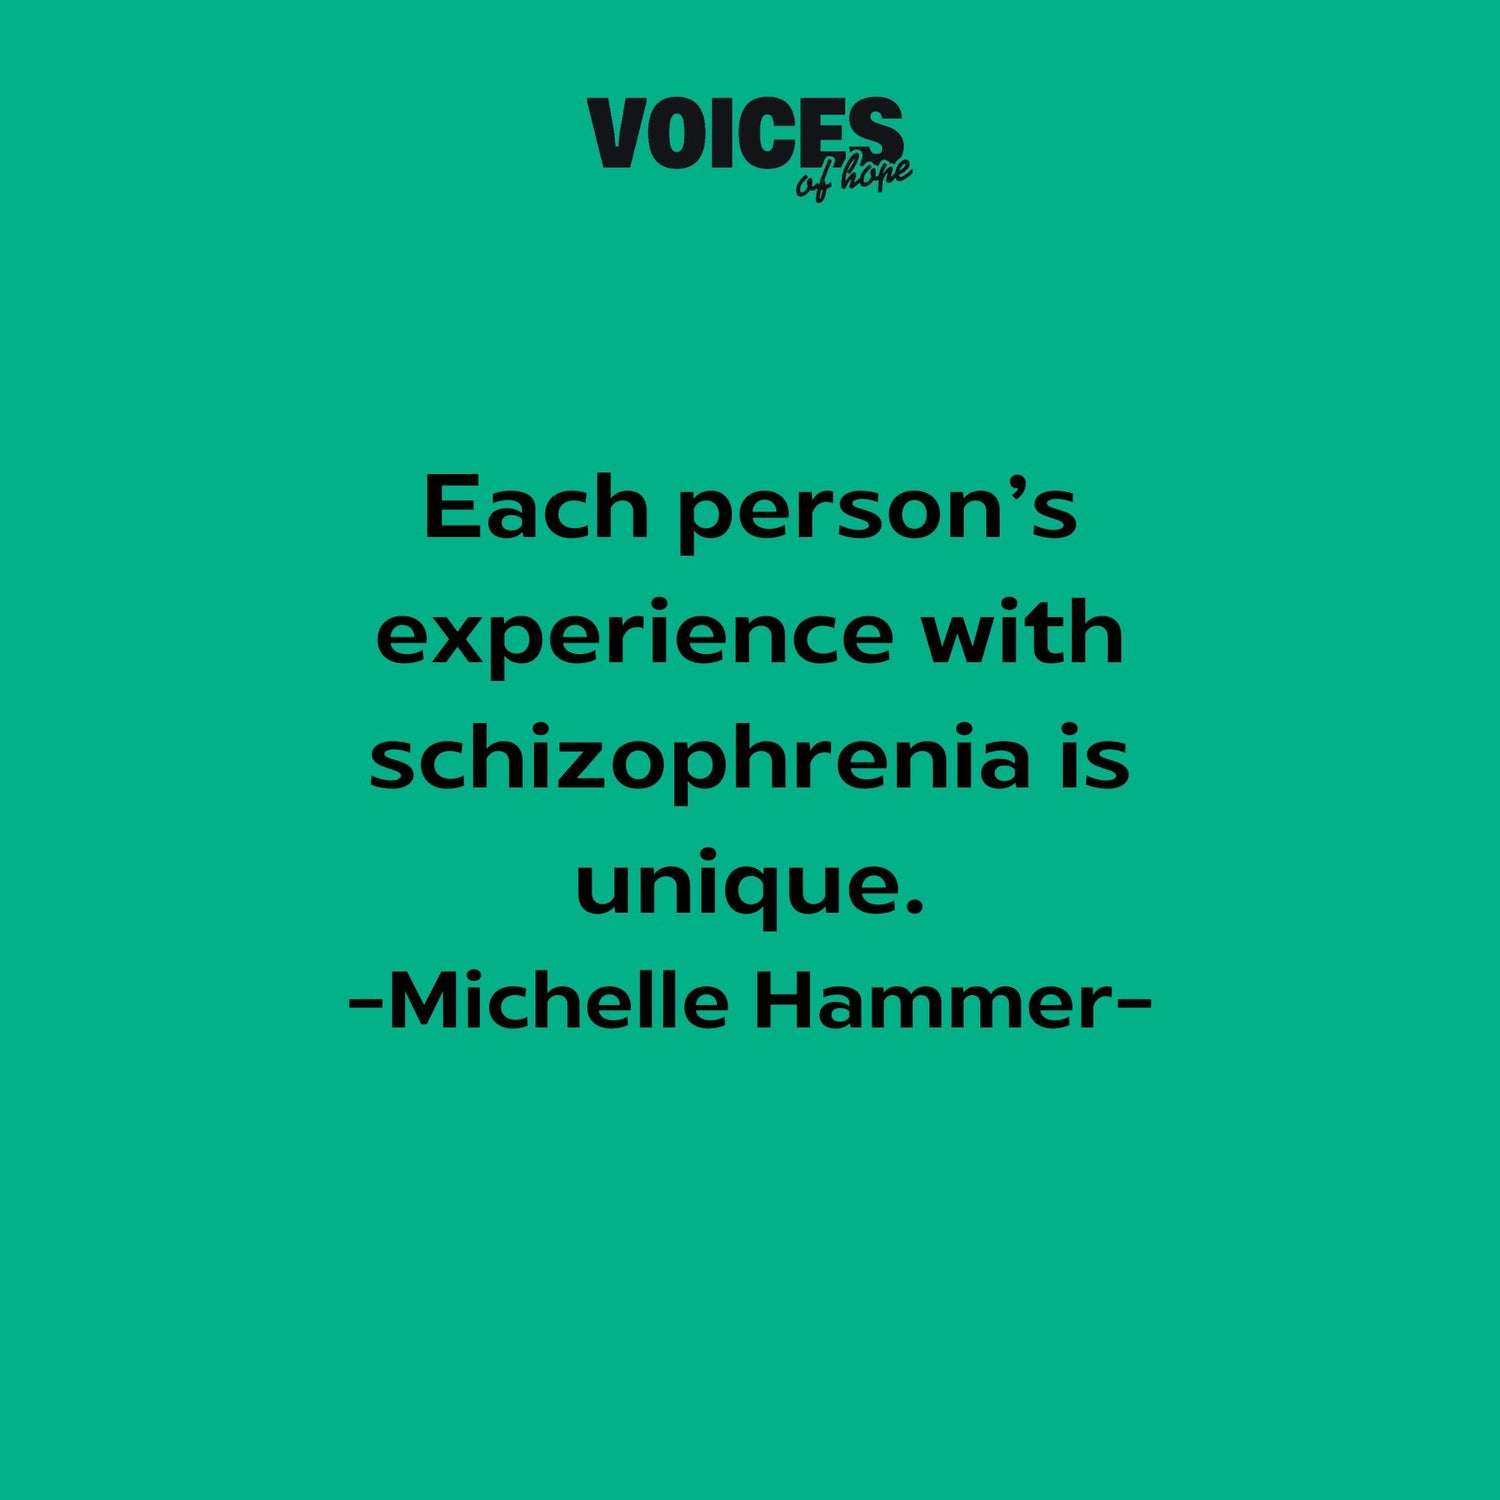 Is There Hope for Individuals Diagnosed with Schizophrenia?